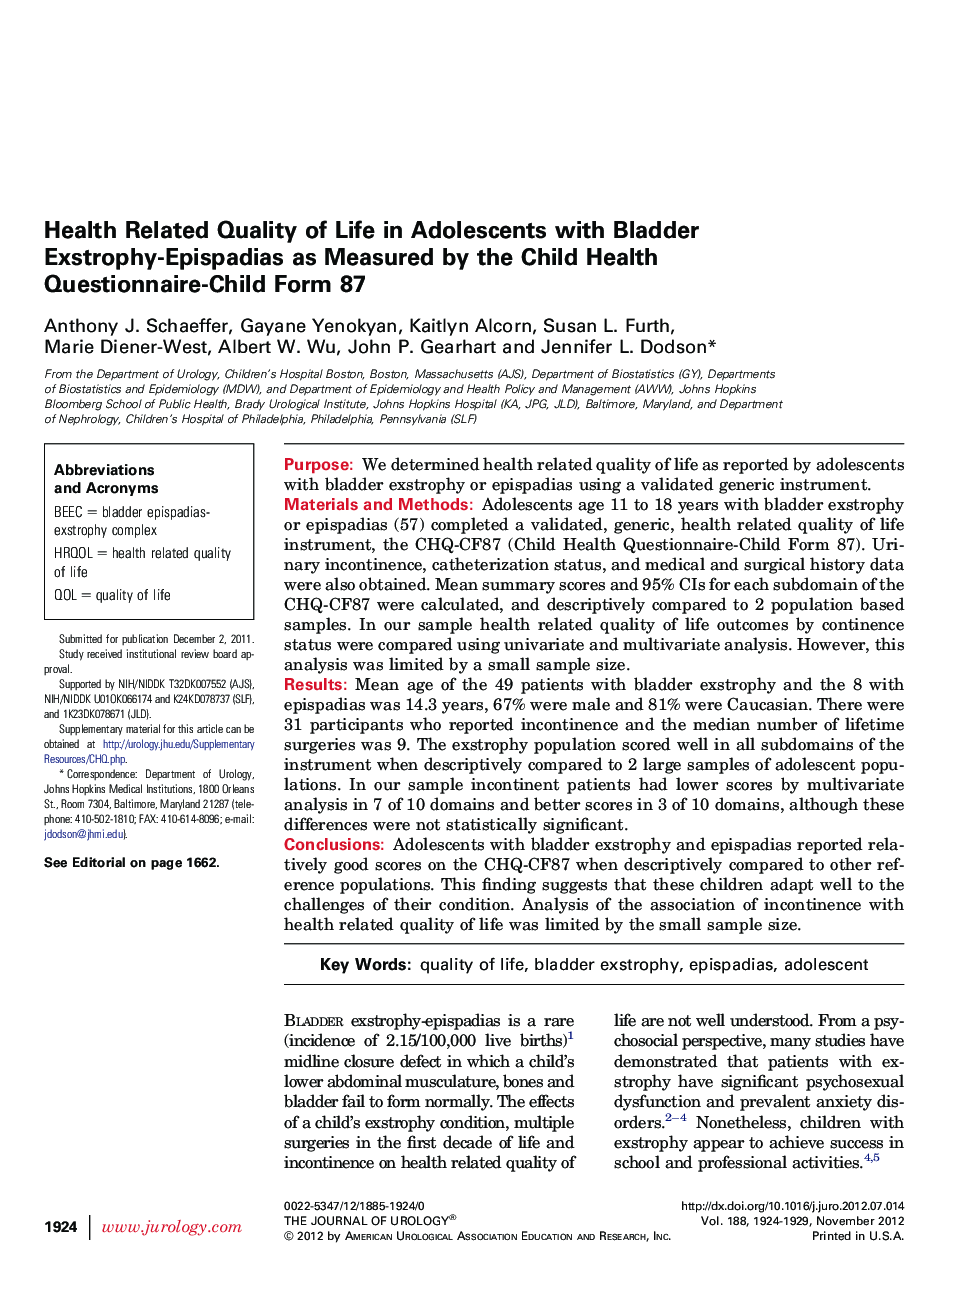 Health Related Quality of Life in Adolescents with Bladder Exstrophy-Epispadias as Measured by the Child Health Questionnaire-Child Form 87 